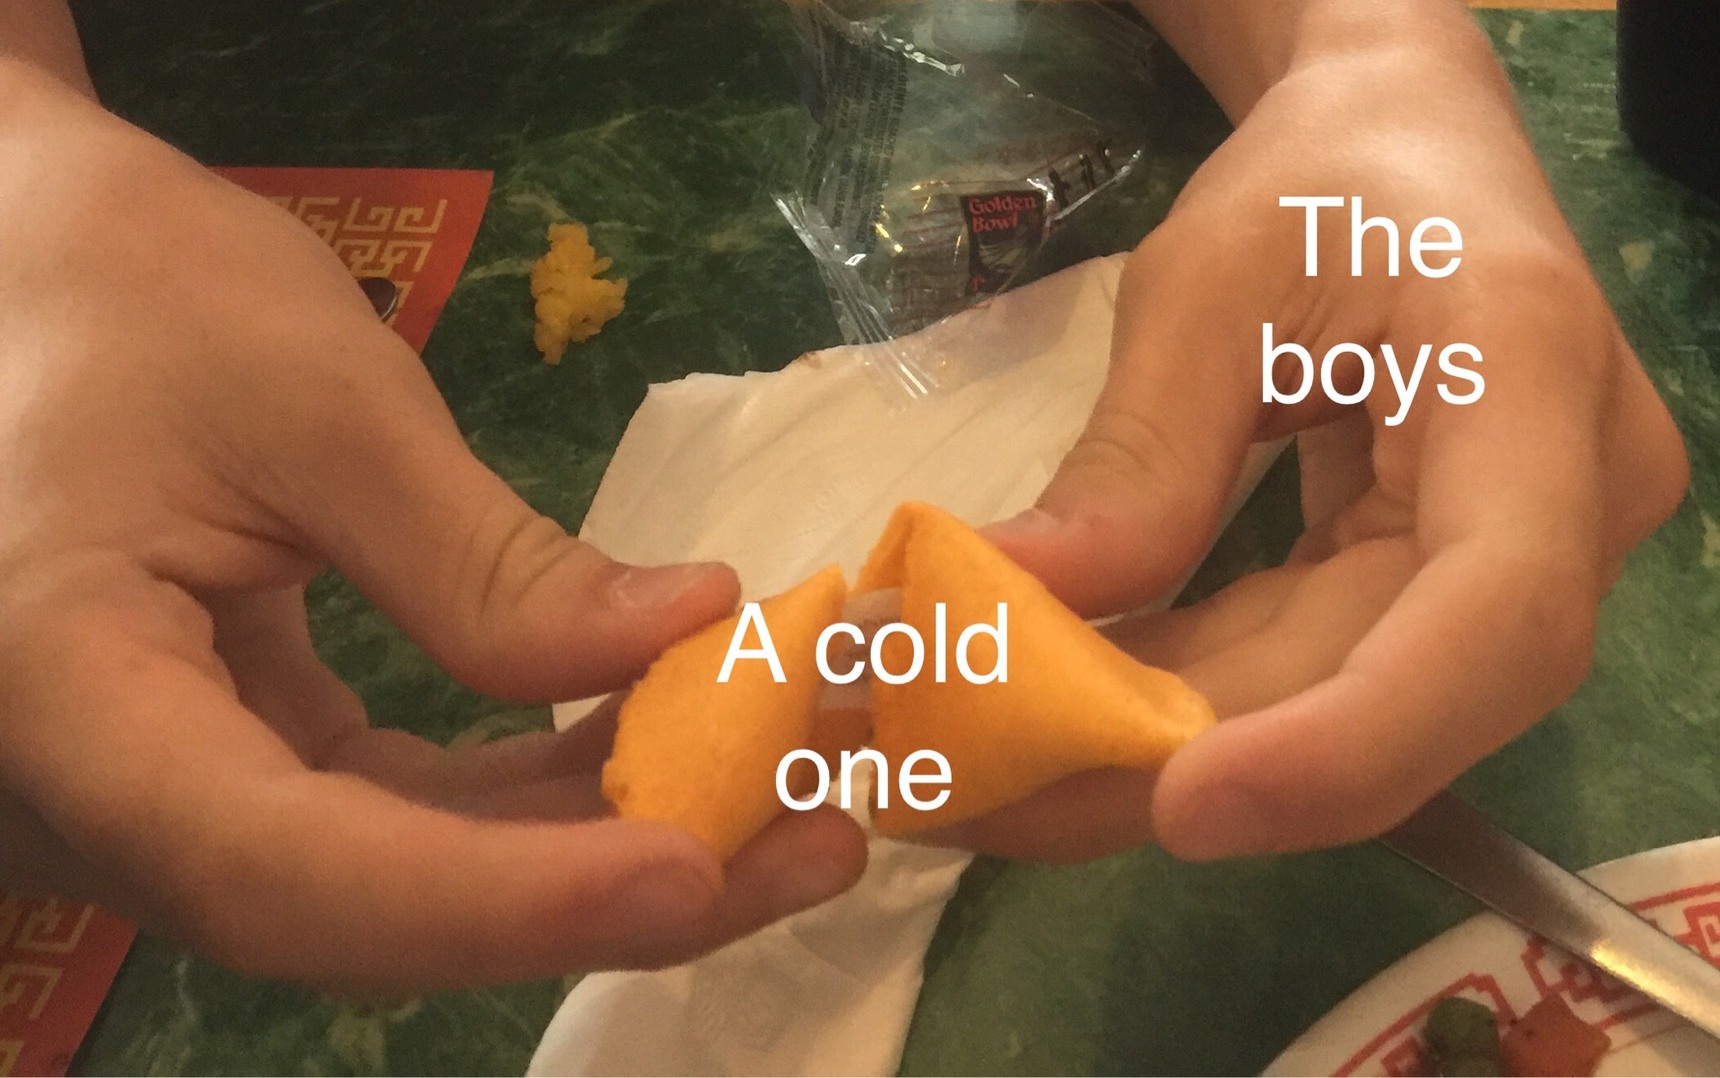 cracking a cold one with the boys - meme